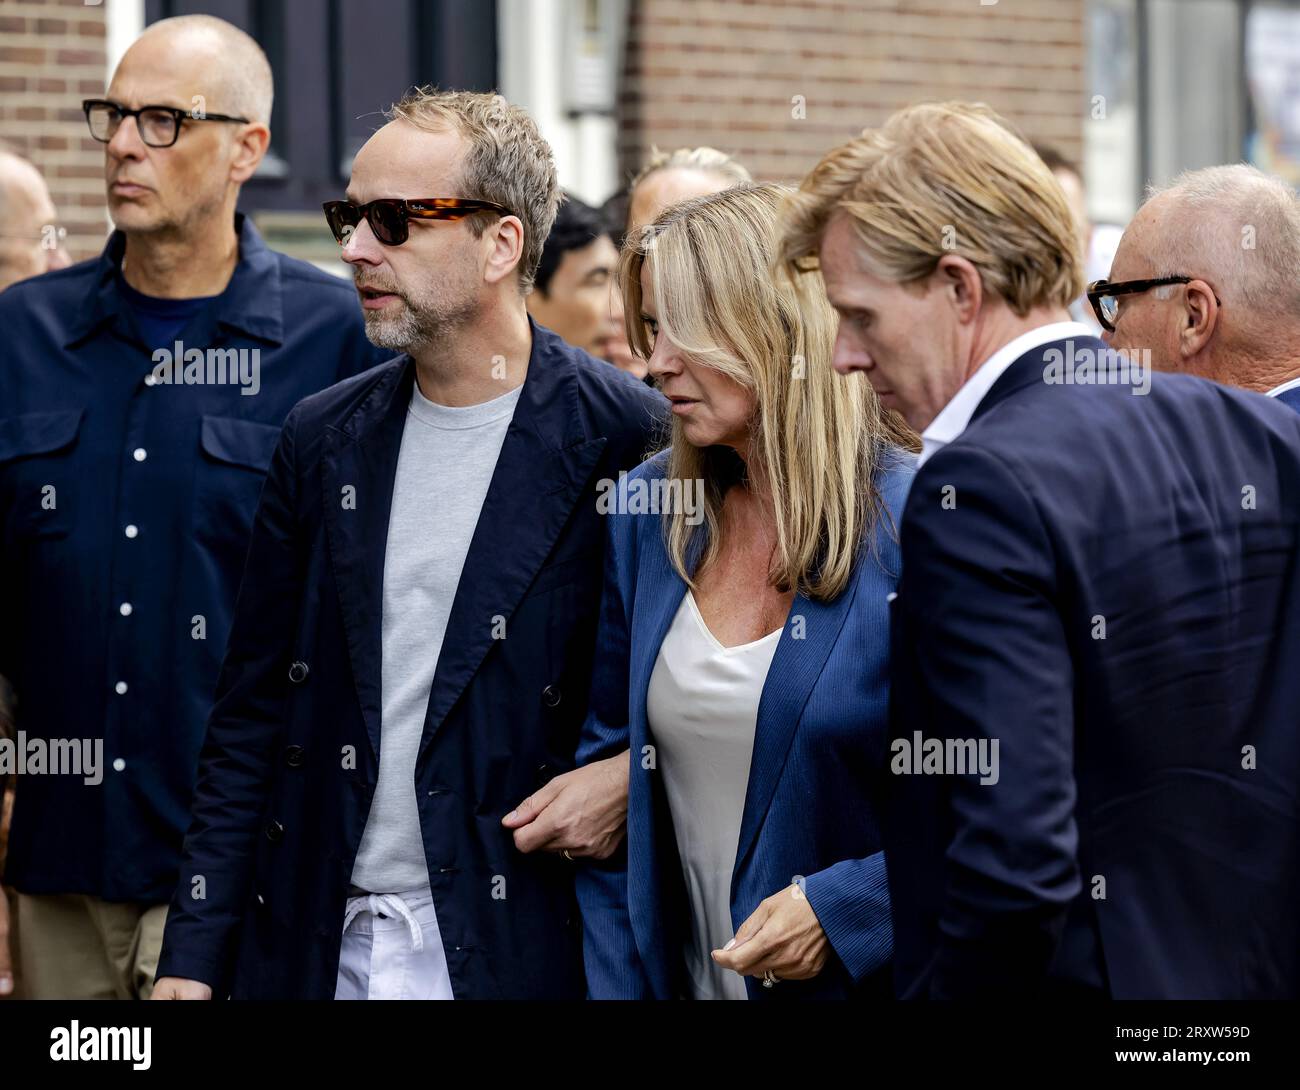 AMSTERDAM - Linda de Mol arrives at the Westerkerk for the funeral service of Erwin Olaf. The world-famous photographer died at the age of 64 while recovering from a lung transplant. ANP ROBIN VAN LONKHUIJSEN netherlands out - belgium out Stock Photo